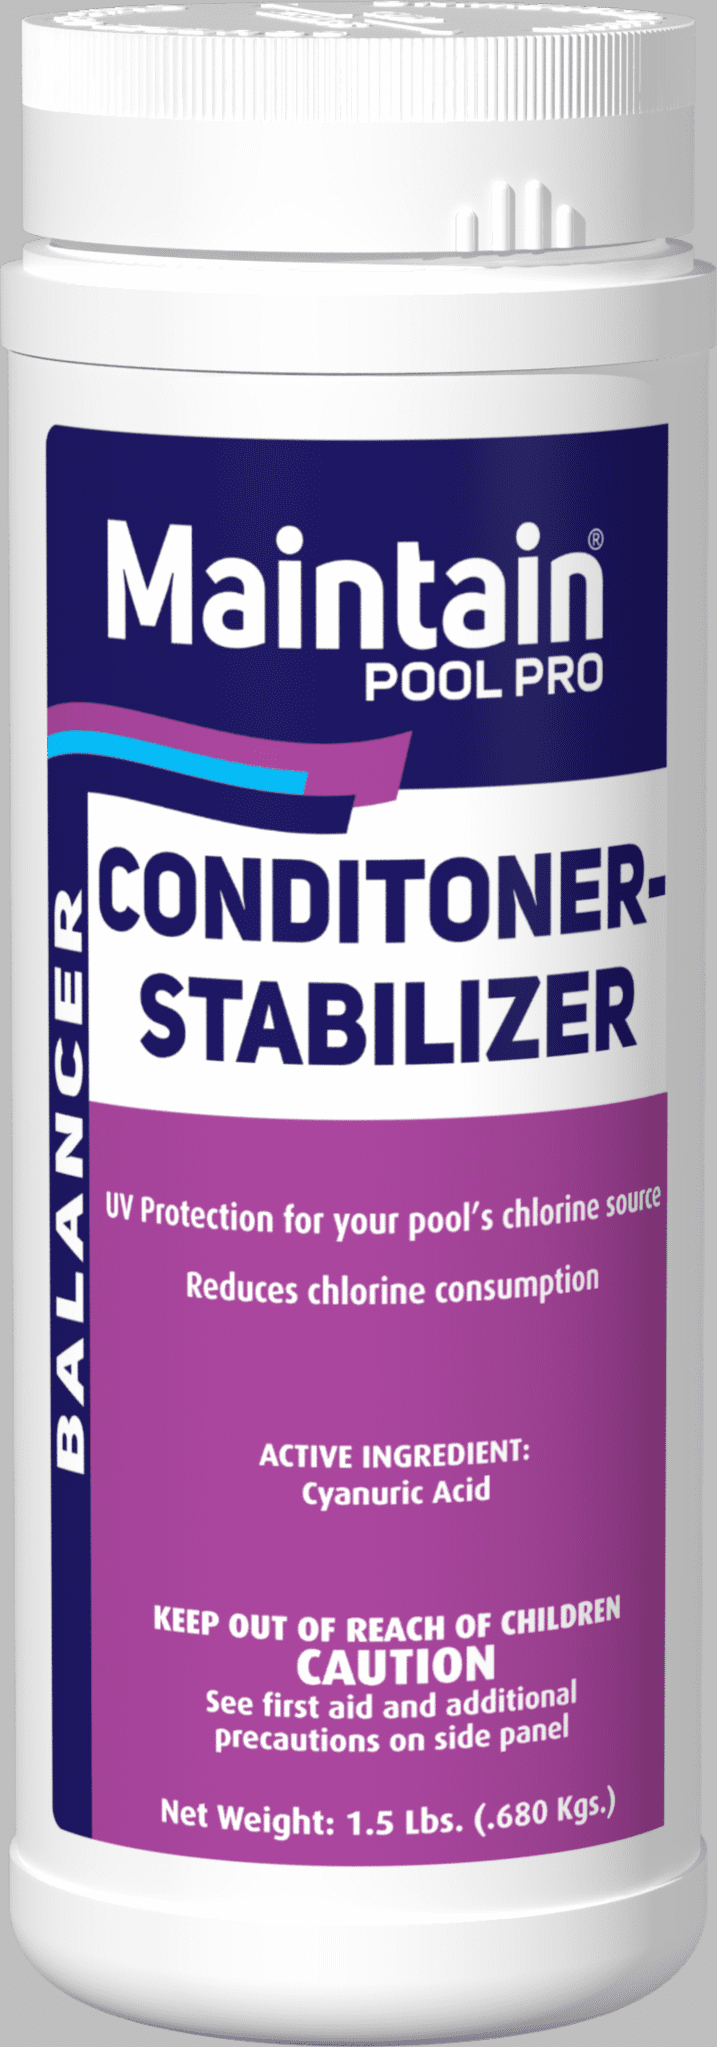 Chlorine Stabilizer Pool Water Conditioner